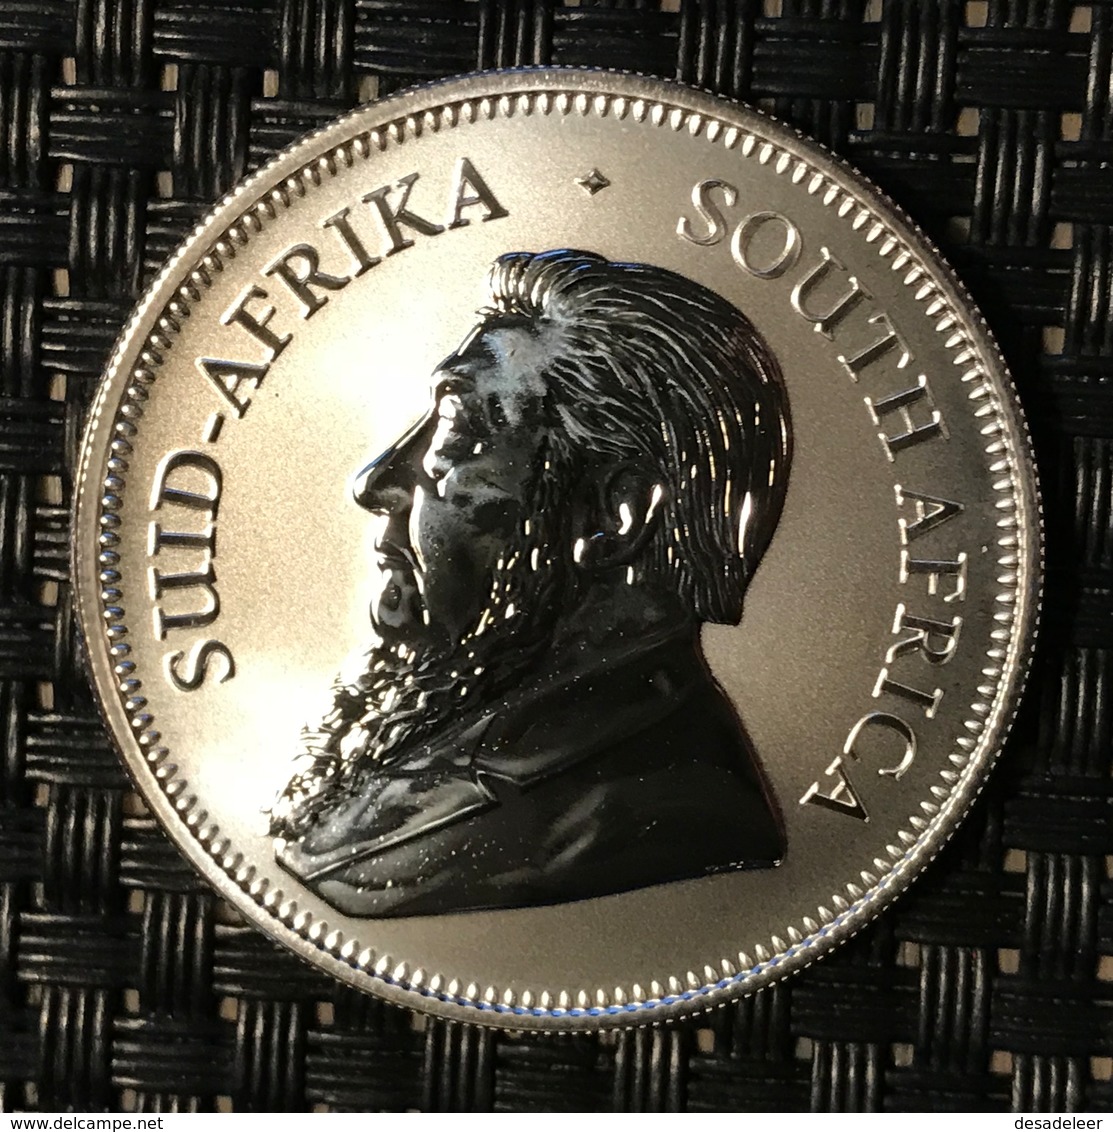 South Africa - Krugerrand 2017  "50th Aniversary" - Cambodia